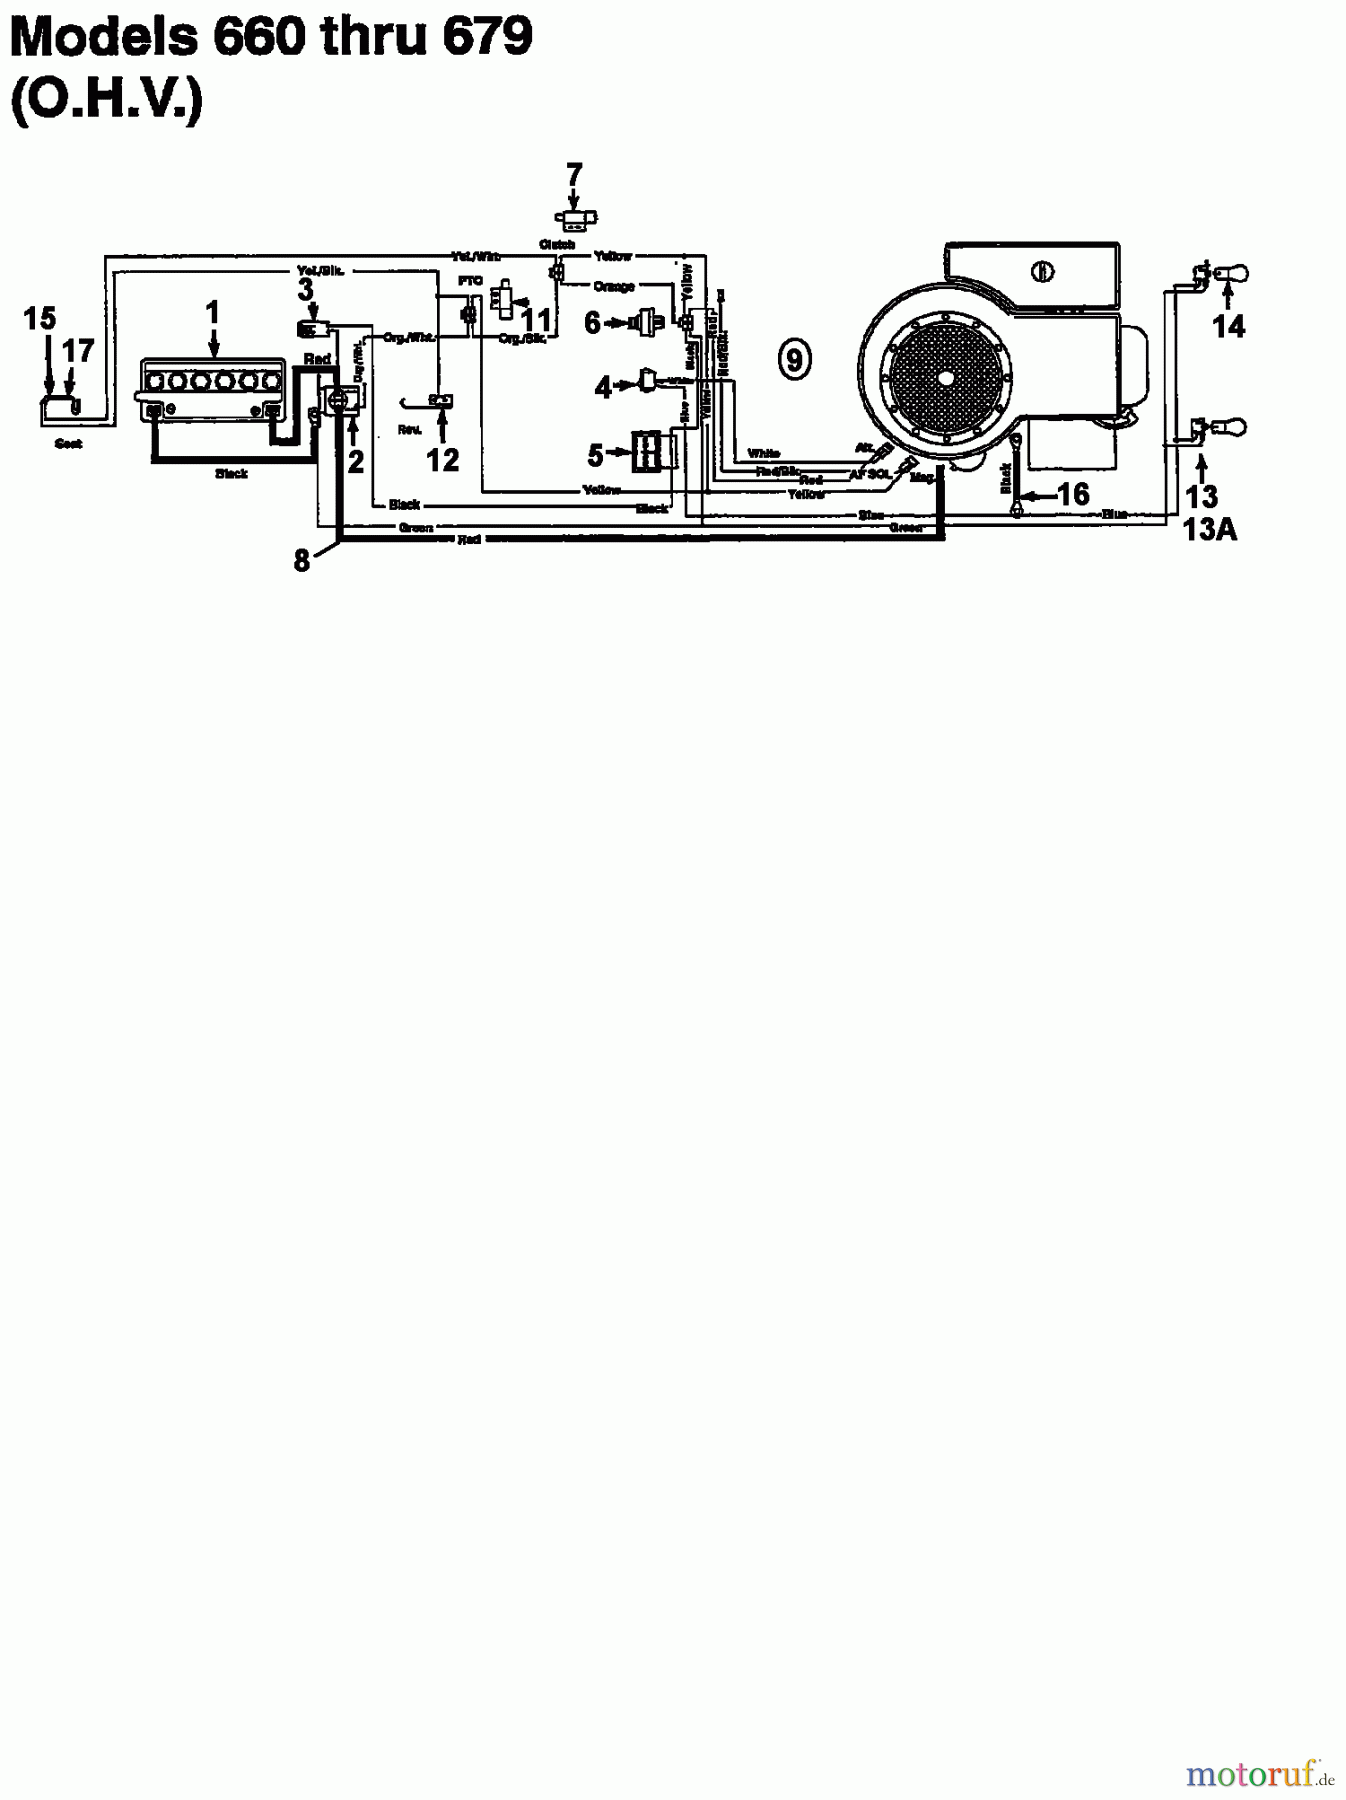  Bauhaus Lawn tractors Funrunner 133I679F646  (1993) Wiring diagram for O.H.V.